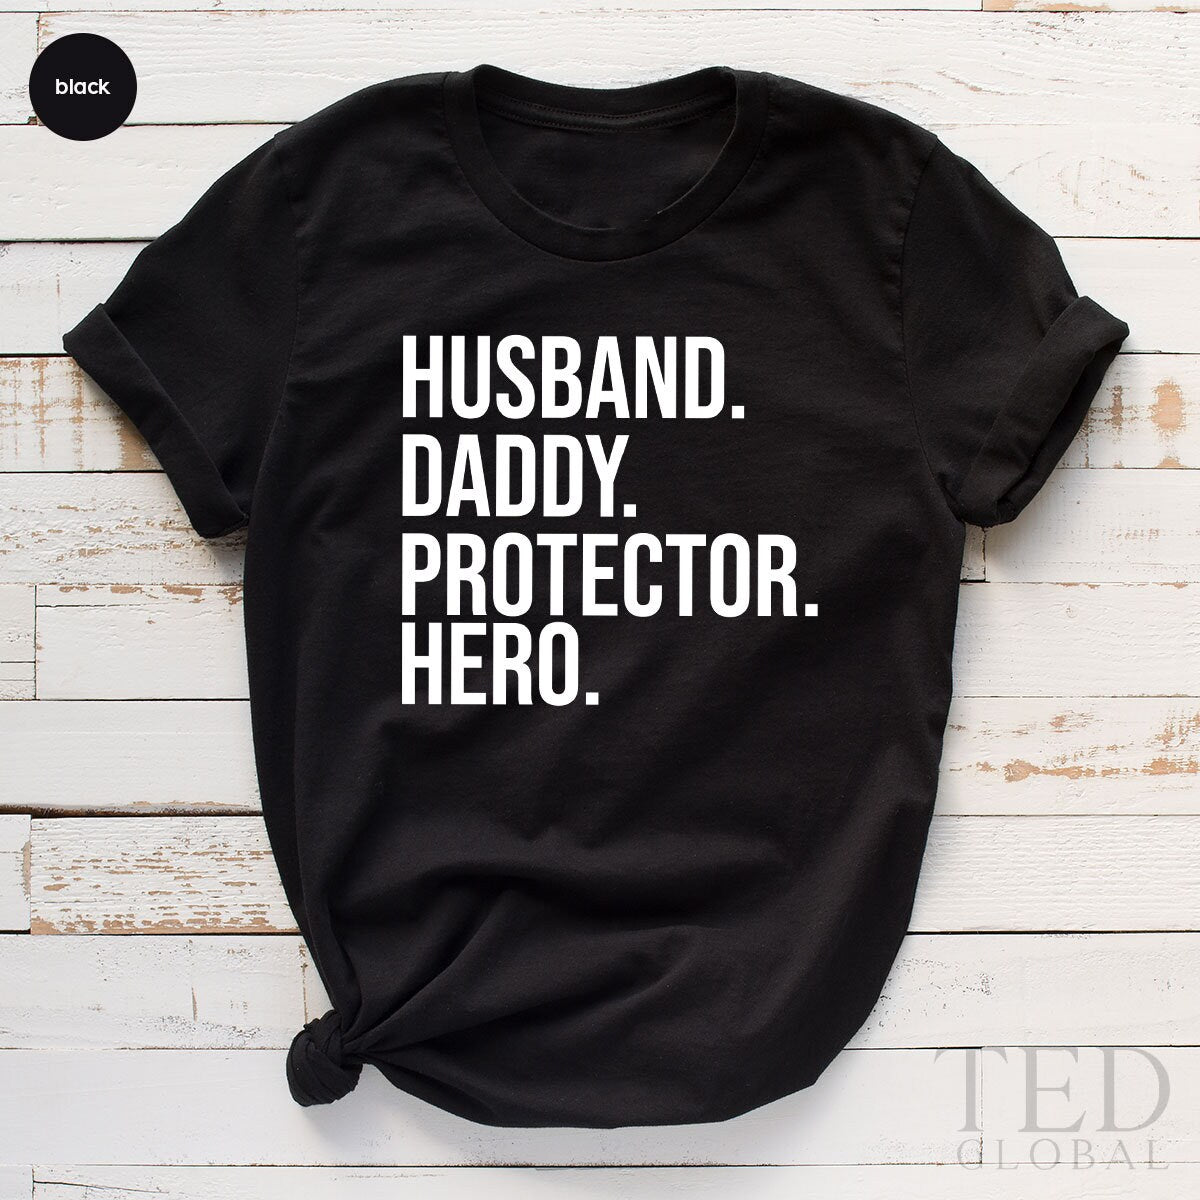 Dad Shirt, Best Dad Shirt, Protector Hero Daddy T Shirt, Dad Birthday Gift, Gift For Husband, Dad To Be Shirt , Fathers Day Gift From Wife - Fastdeliverytees.com